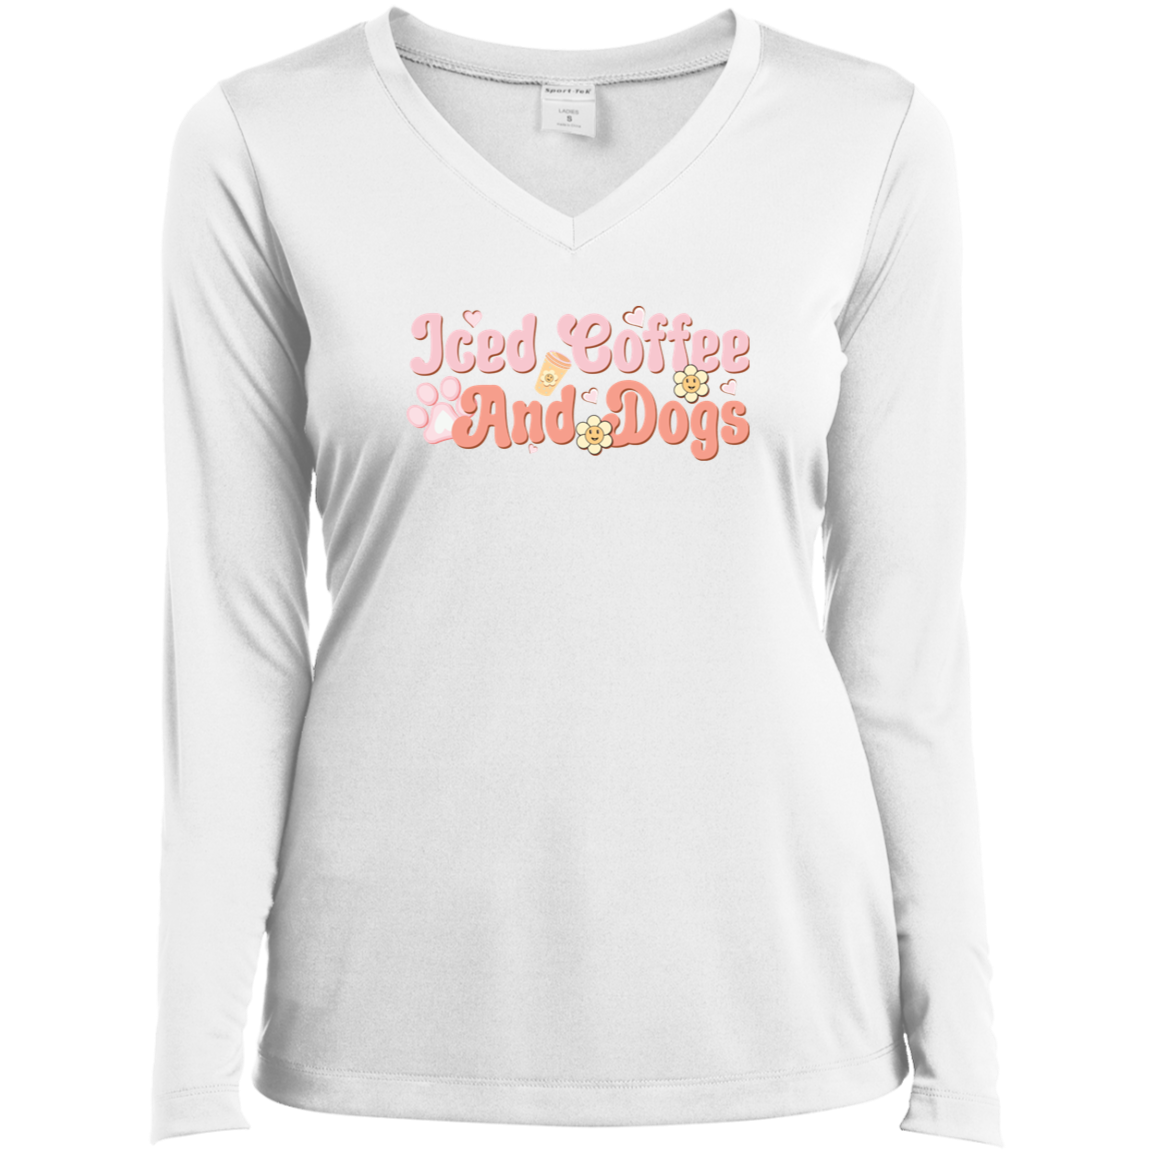 Iced Coffee and Dogs Retro Daisy Ladies’ Long Sleeve Performance V-Neck Tee